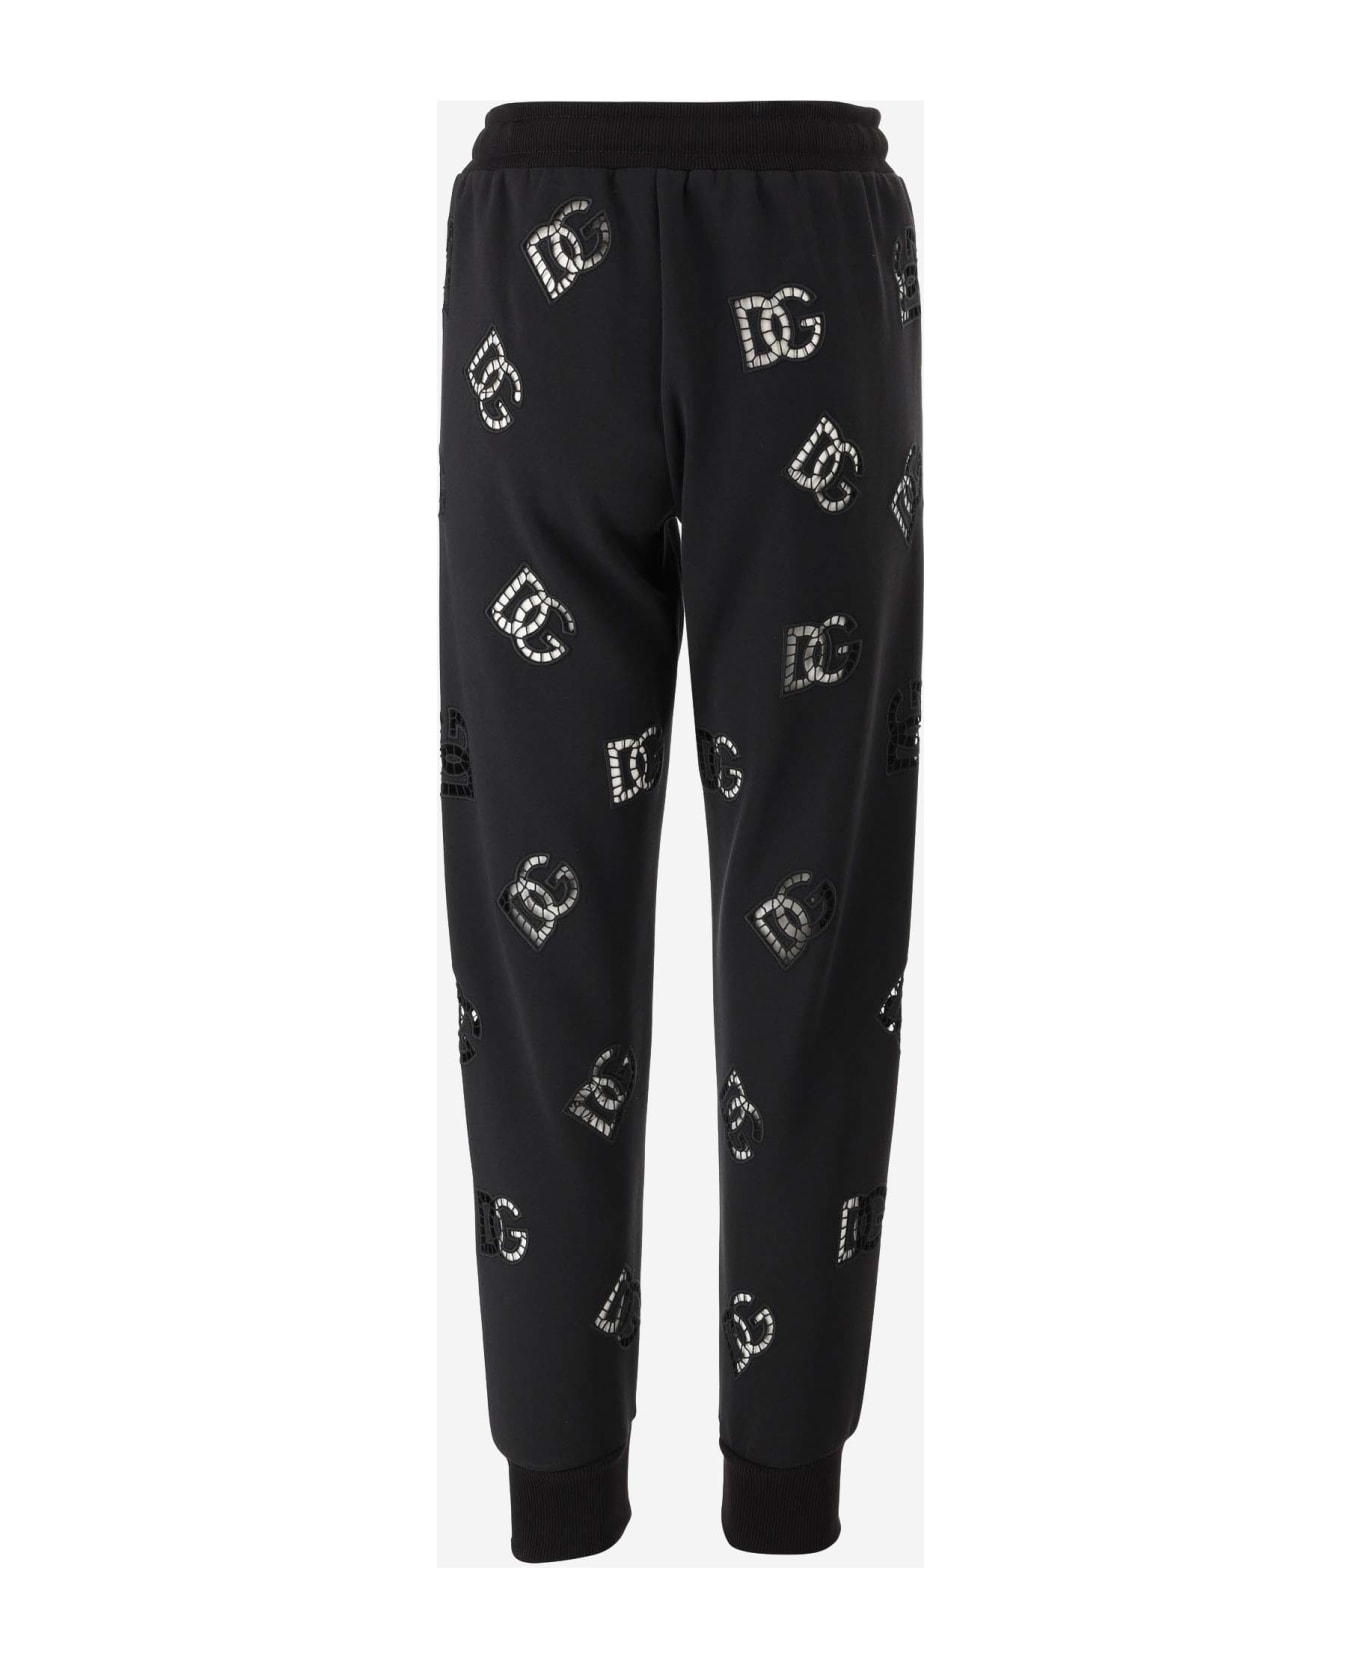 Dolce & Gabbana Cotton Blend Jersey Pants With Cut Out Embroidery - Black